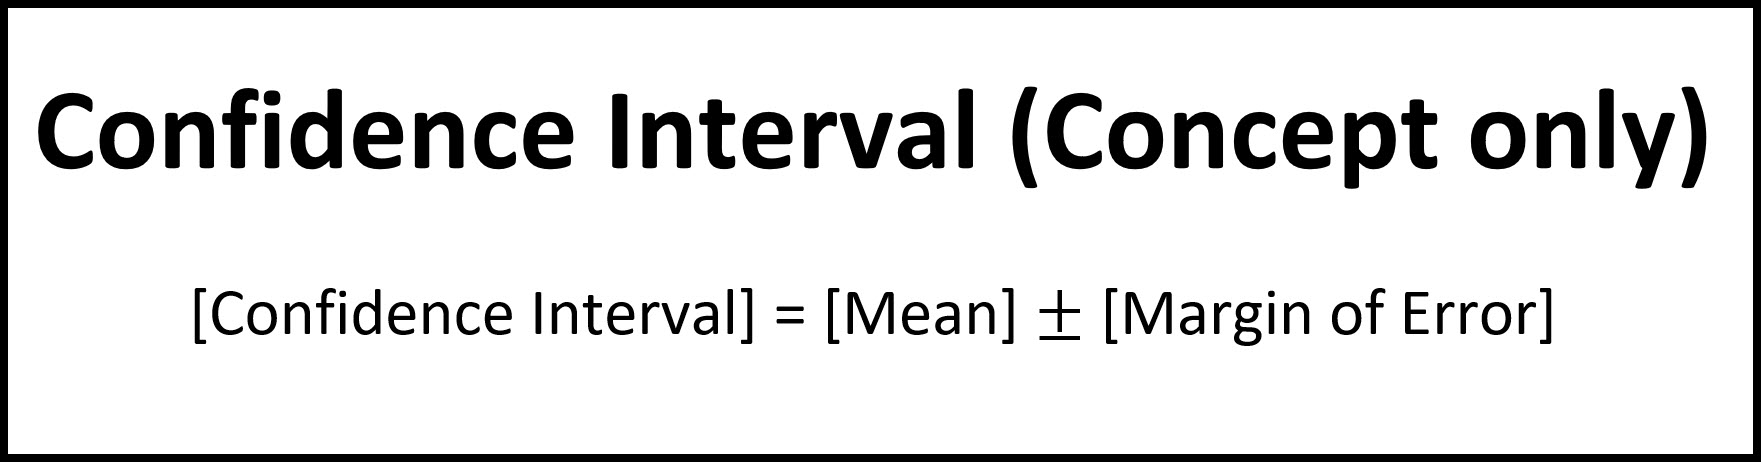 Notes for the Concept of Confidence Interval